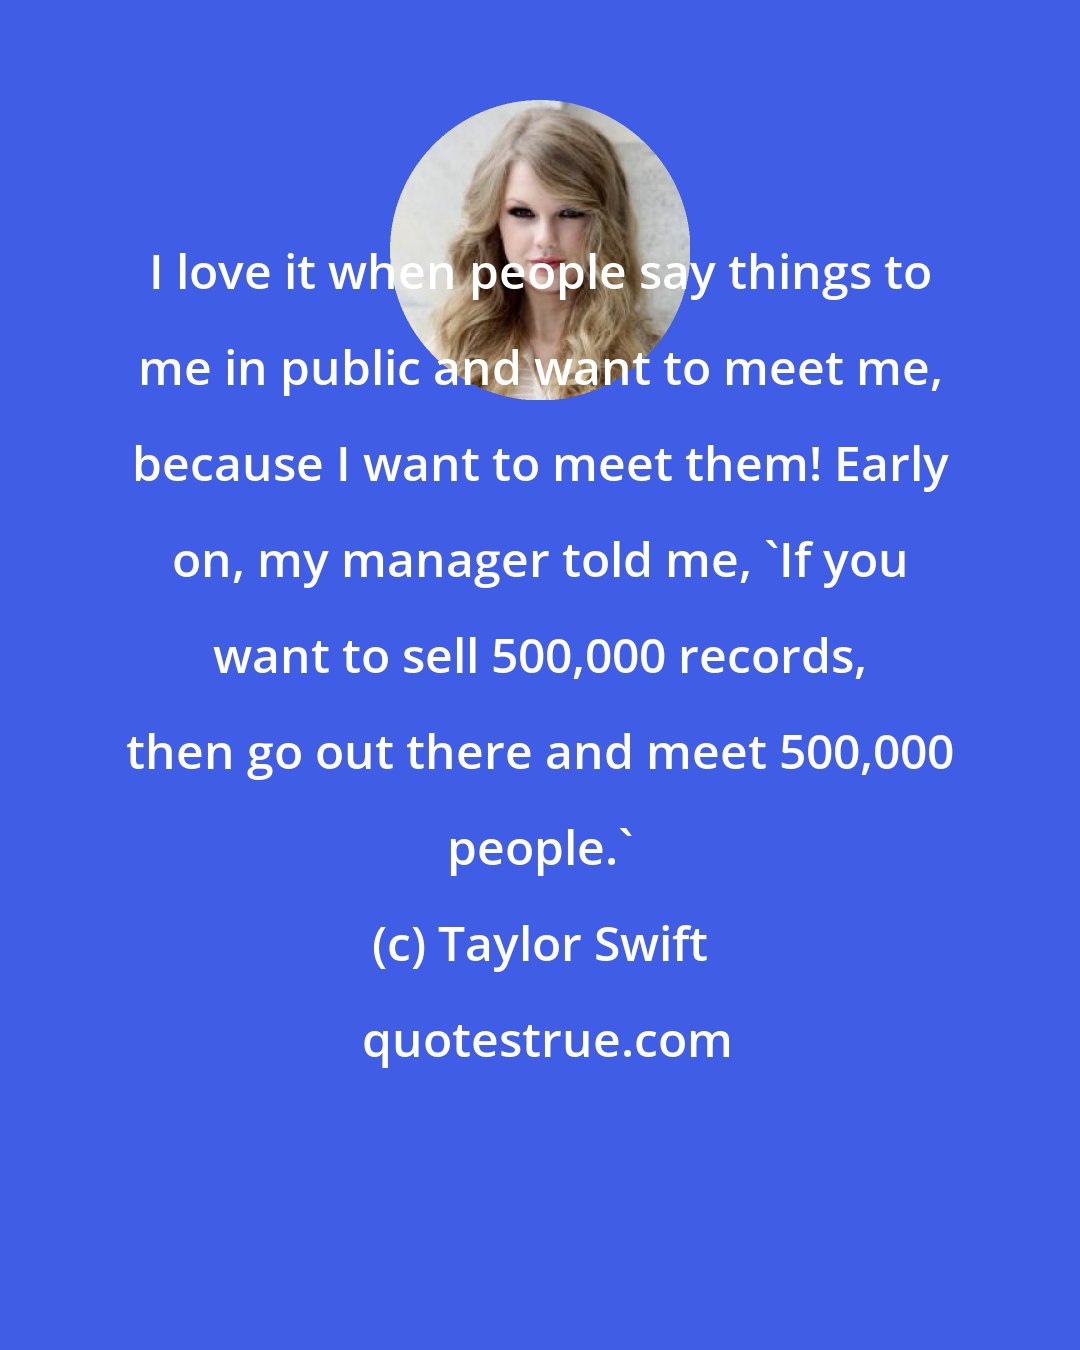 Taylor Swift: I love it when people say things to me in public and want to meet me, because I want to meet them! Early on, my manager told me, 'If you want to sell 500,000 records, then go out there and meet 500,000 people.'